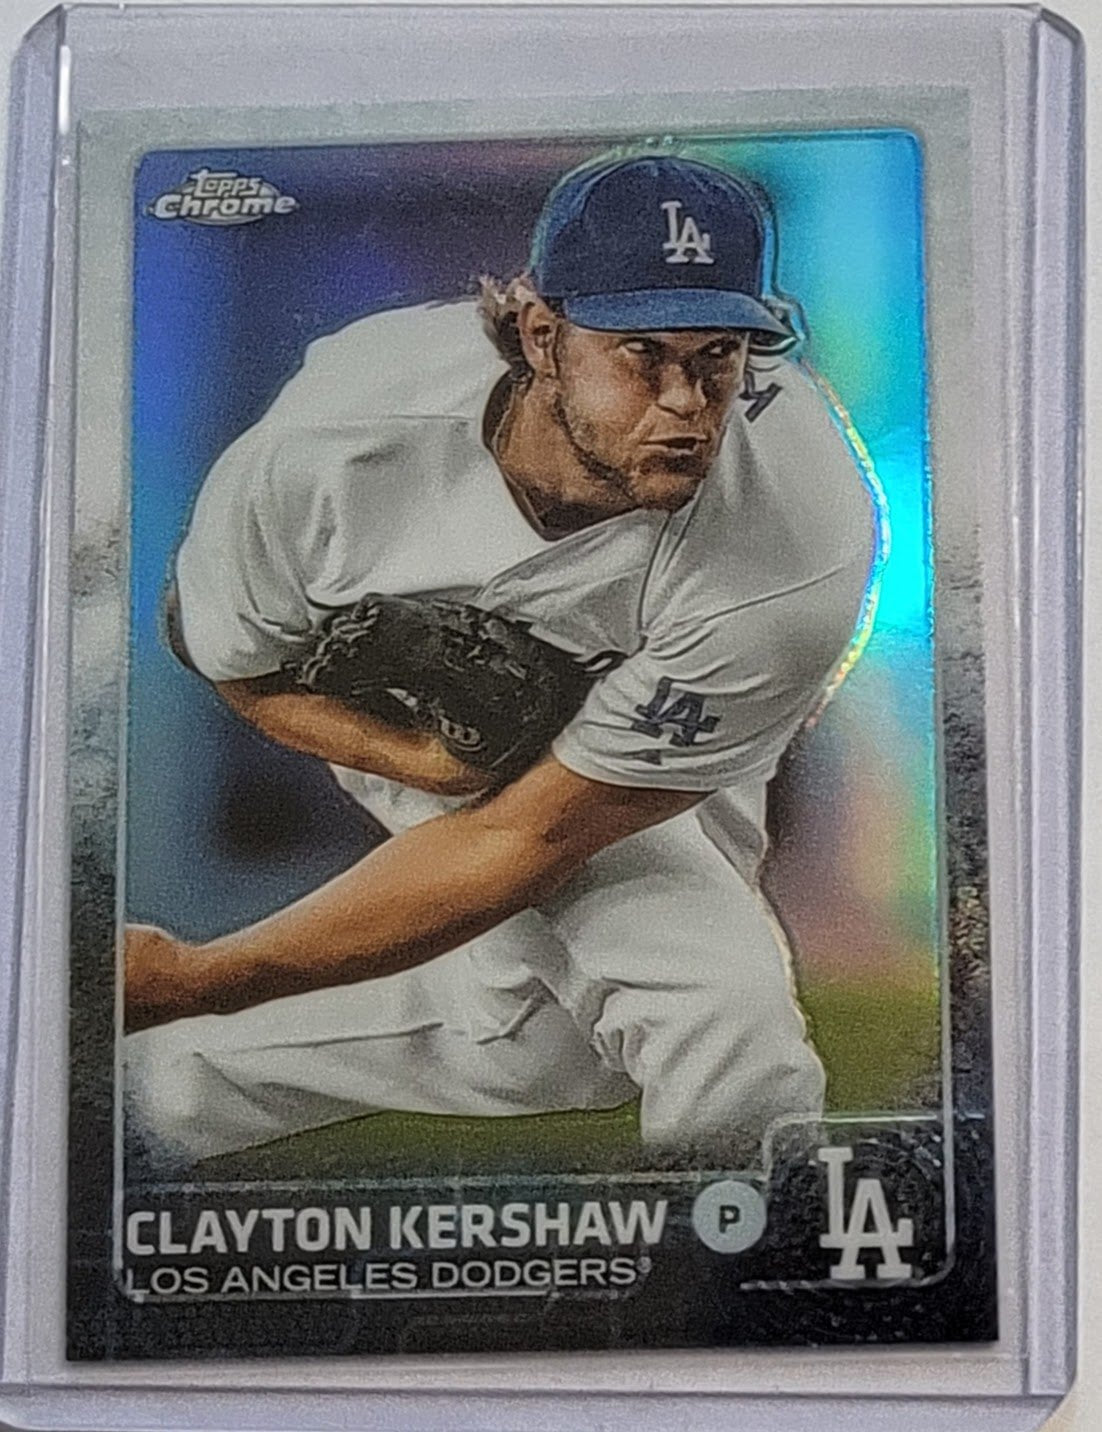 2015 Topps Chrome Clayton Kershaw Refractor Baseball Card TPTV simple Xclusive Collectibles   